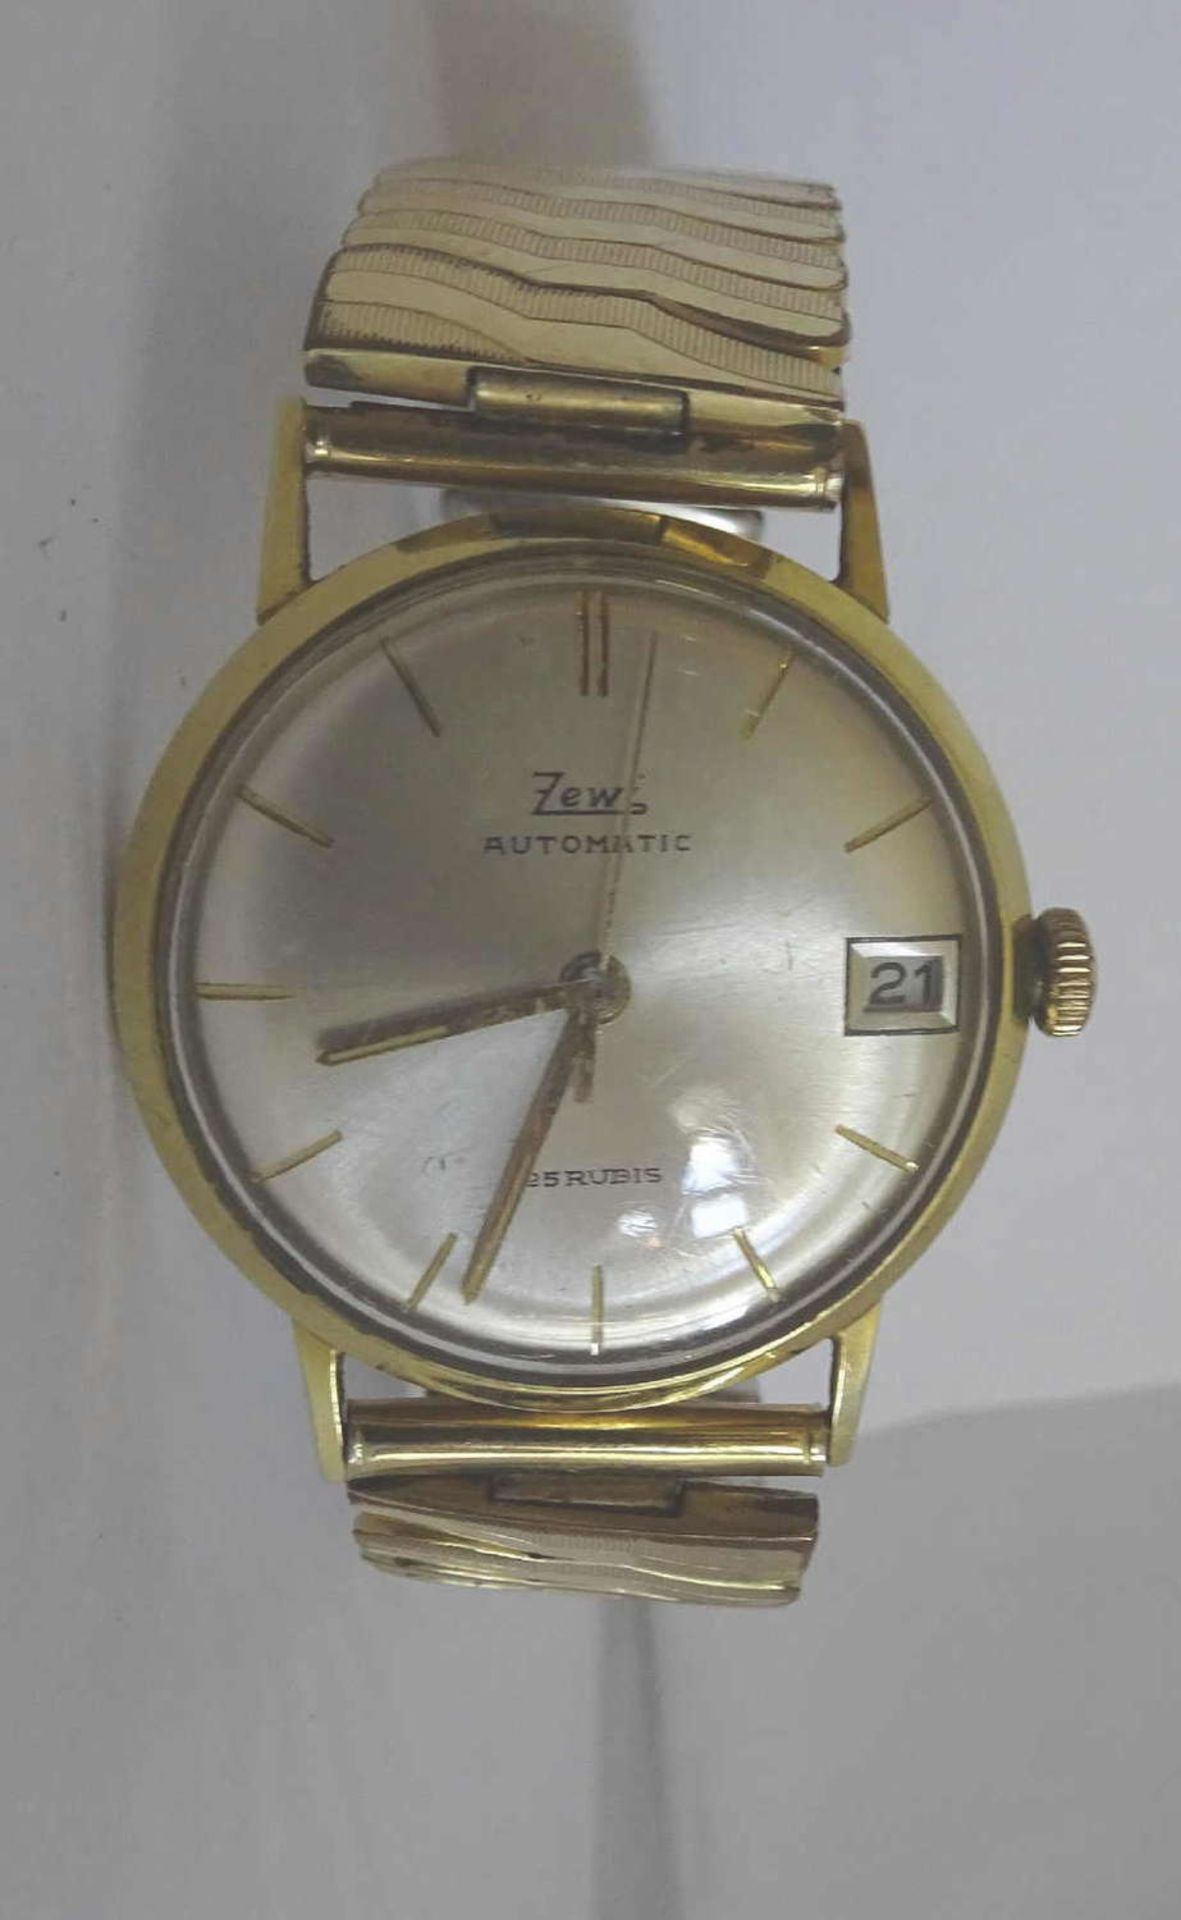 Men's wristwatch Zewi, case 585 gold, function tested.